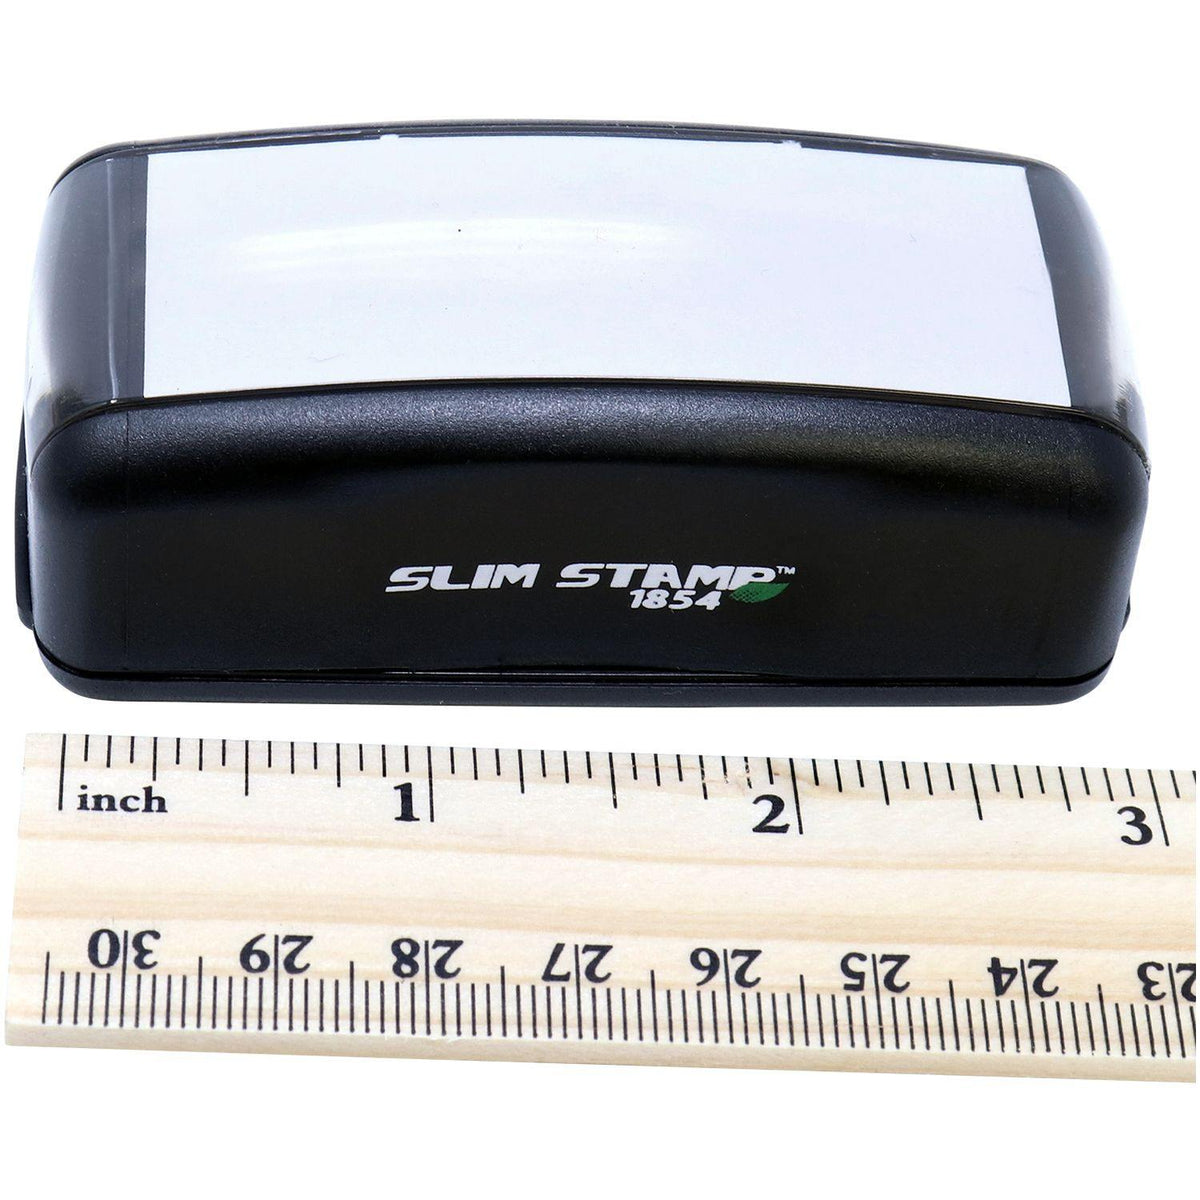 Measurement Large Pre Inked E Mailed Stamp with Ruler